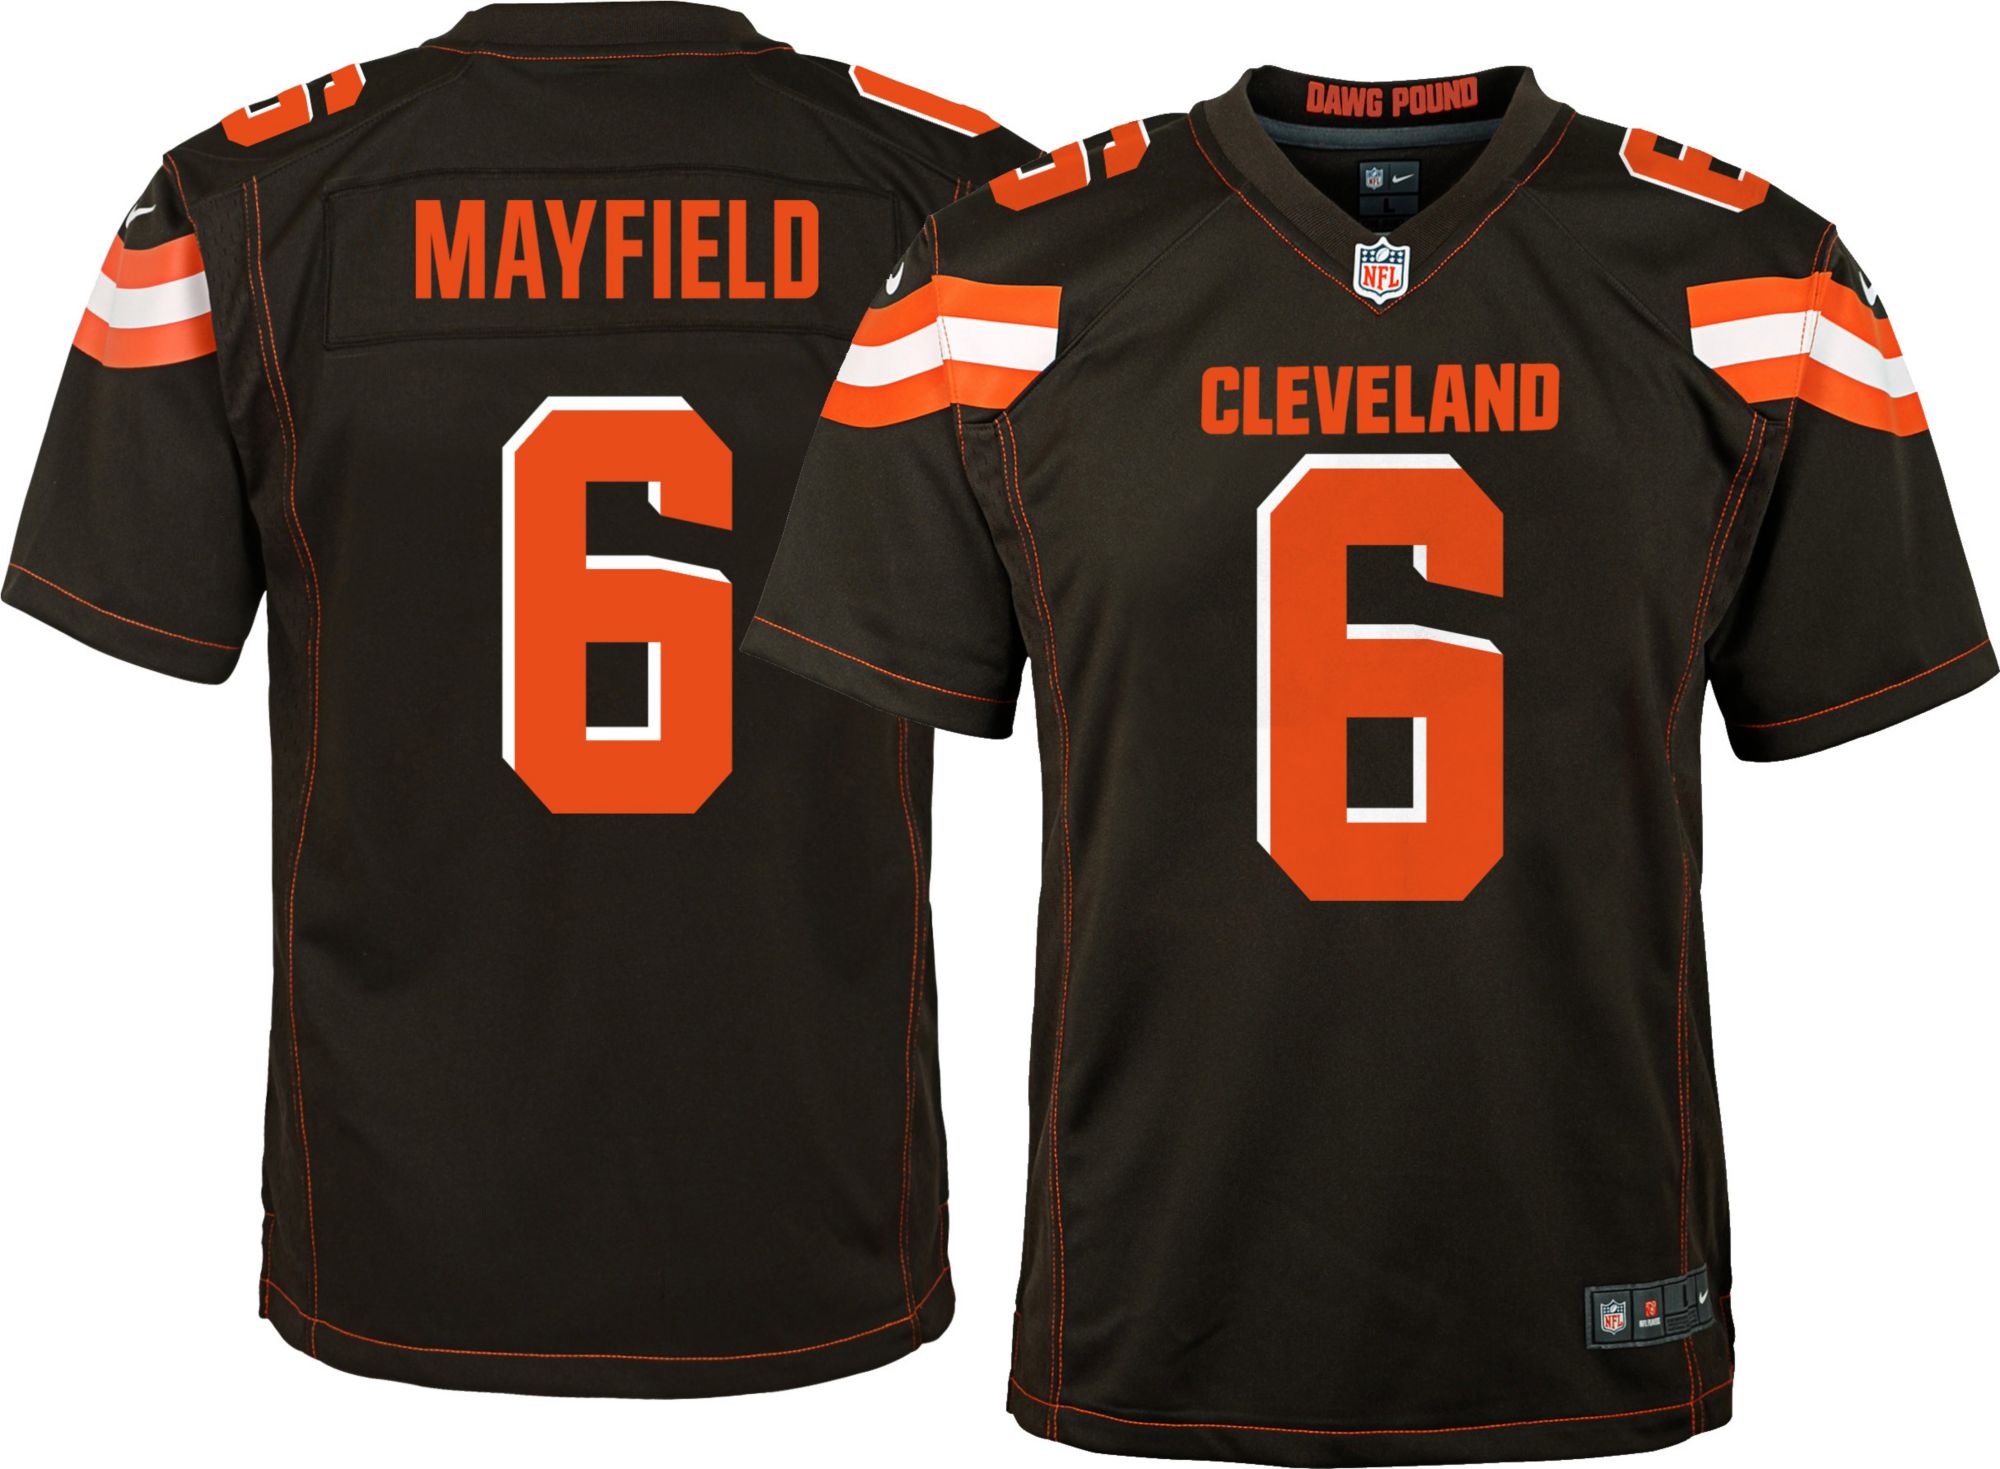 Cleveland Browns Jerseys | Curbside 